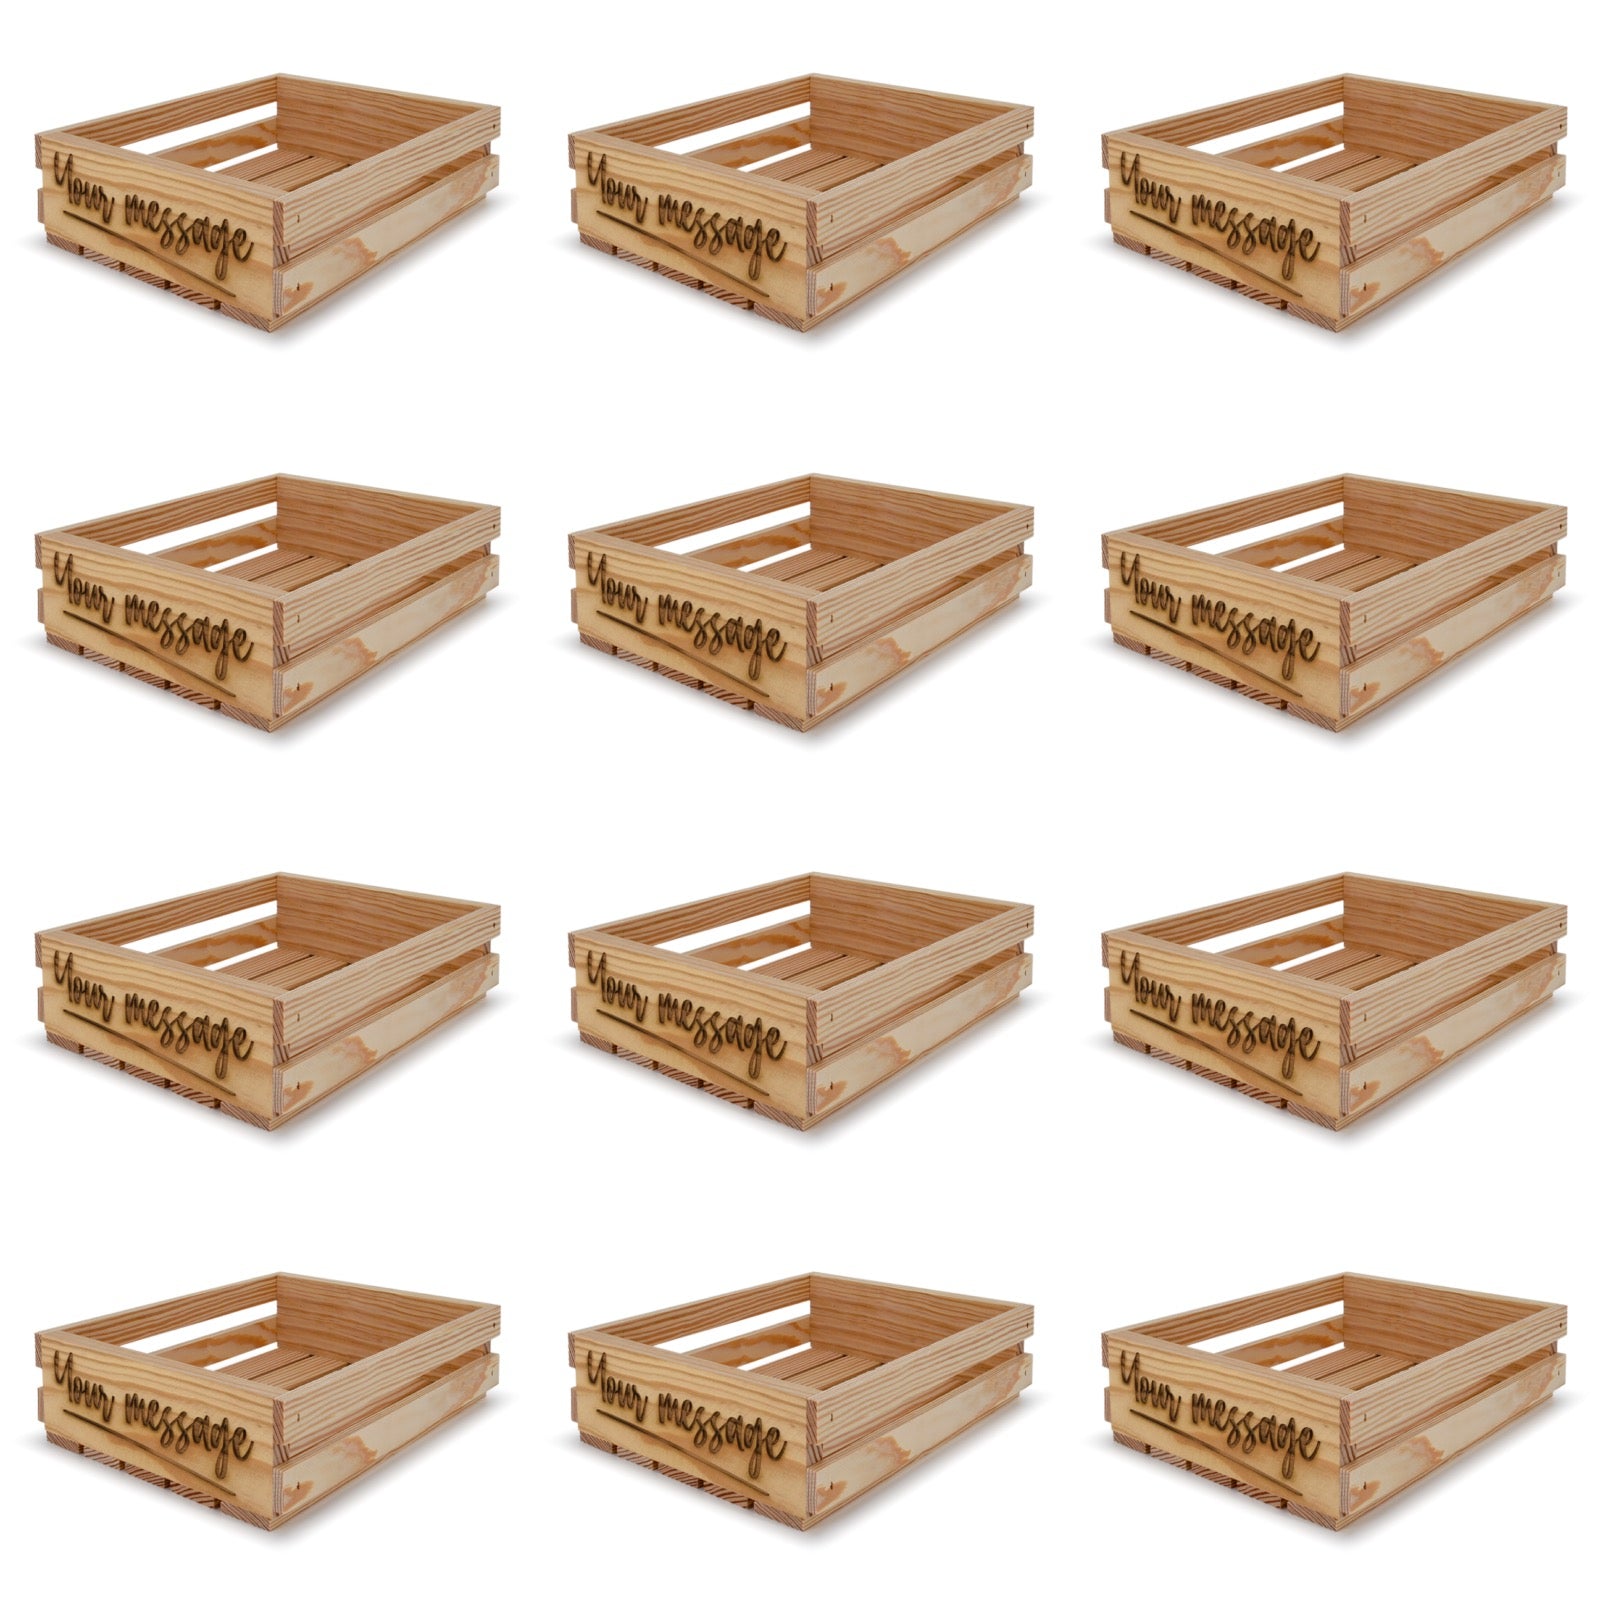 12 Small wooden crates 12x10x3.5 your message included